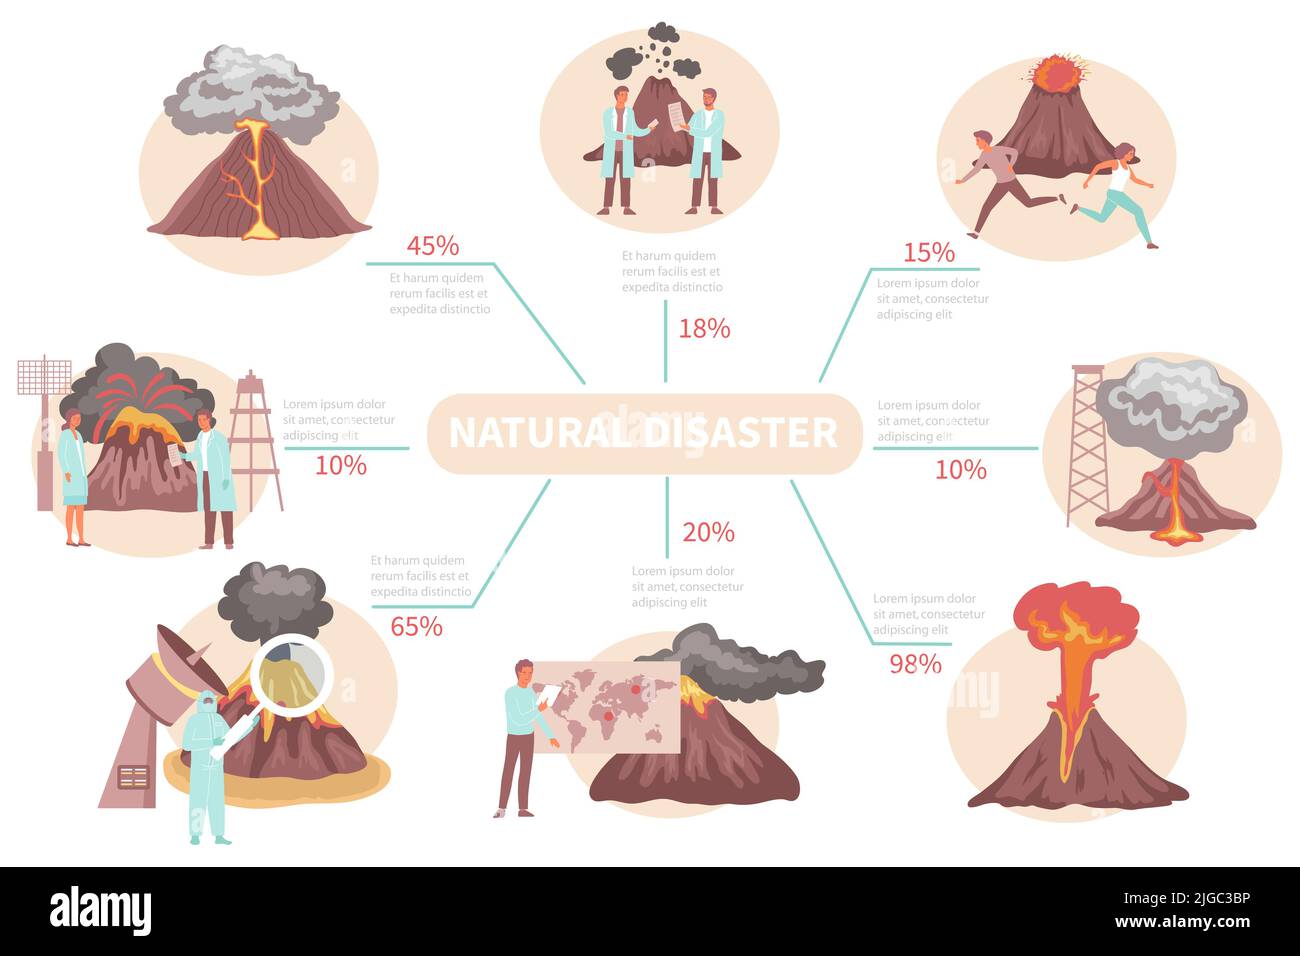 Volcano infographic flat set with isolated images of eruption stages with human characters and text captions vector illustration Stock Vector